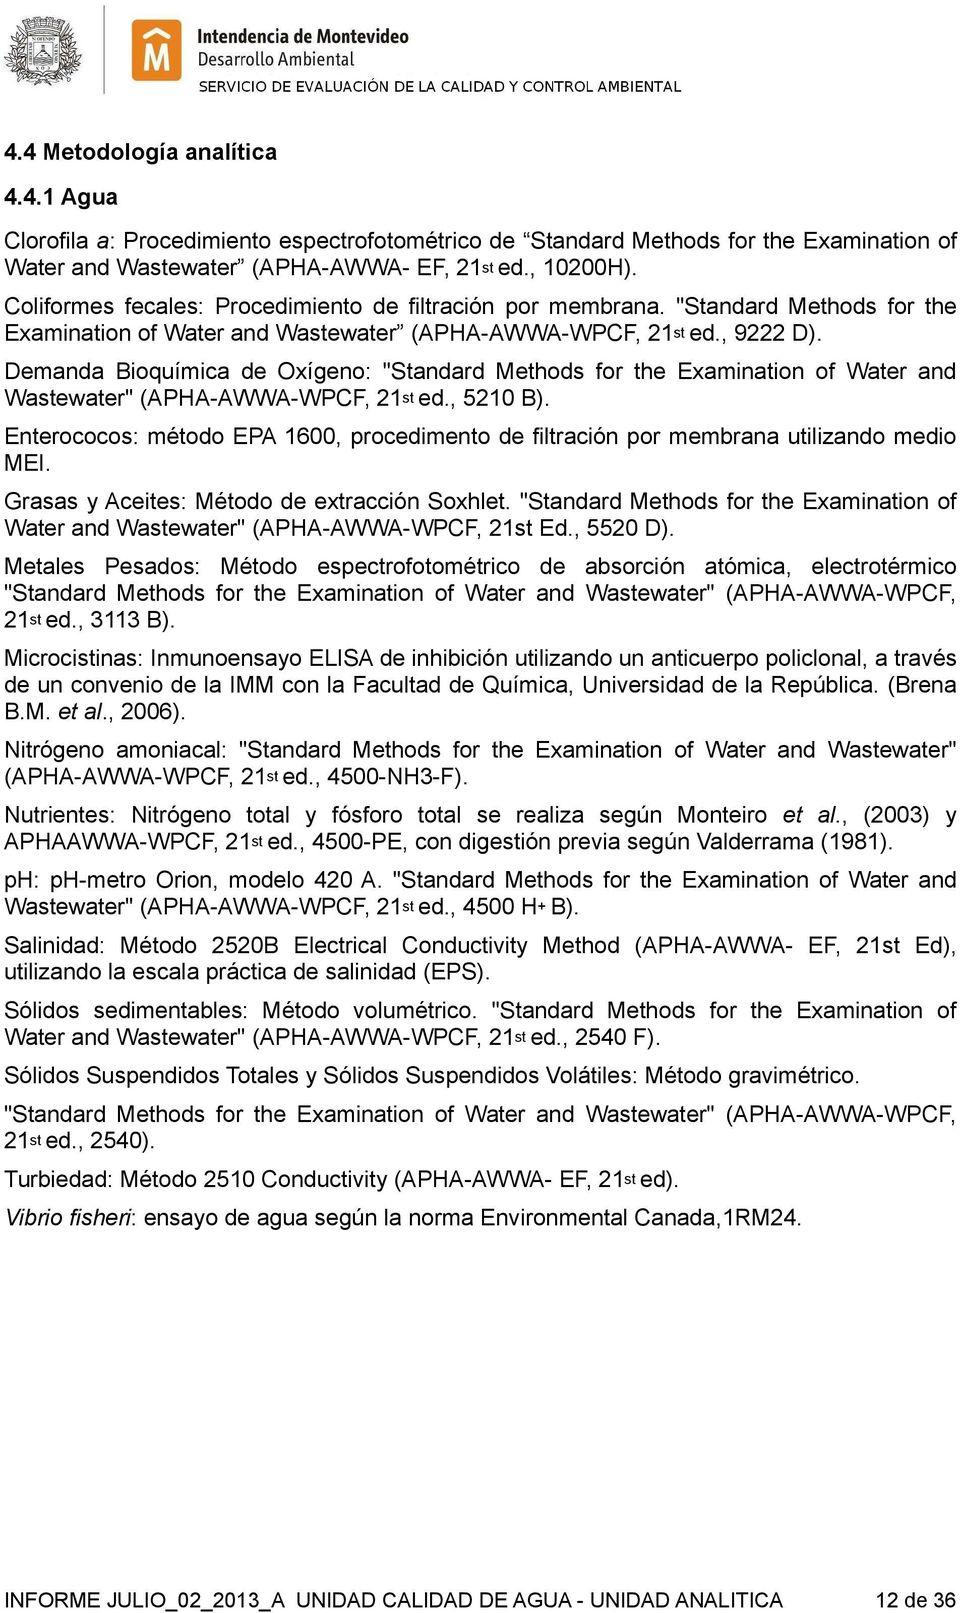 Demanda Bioquímica de Oxígeno: "Standard Methods for the Examination of Water and Wastewater" (APHA-AWWA-WPCF, 21st ed., 521 B).